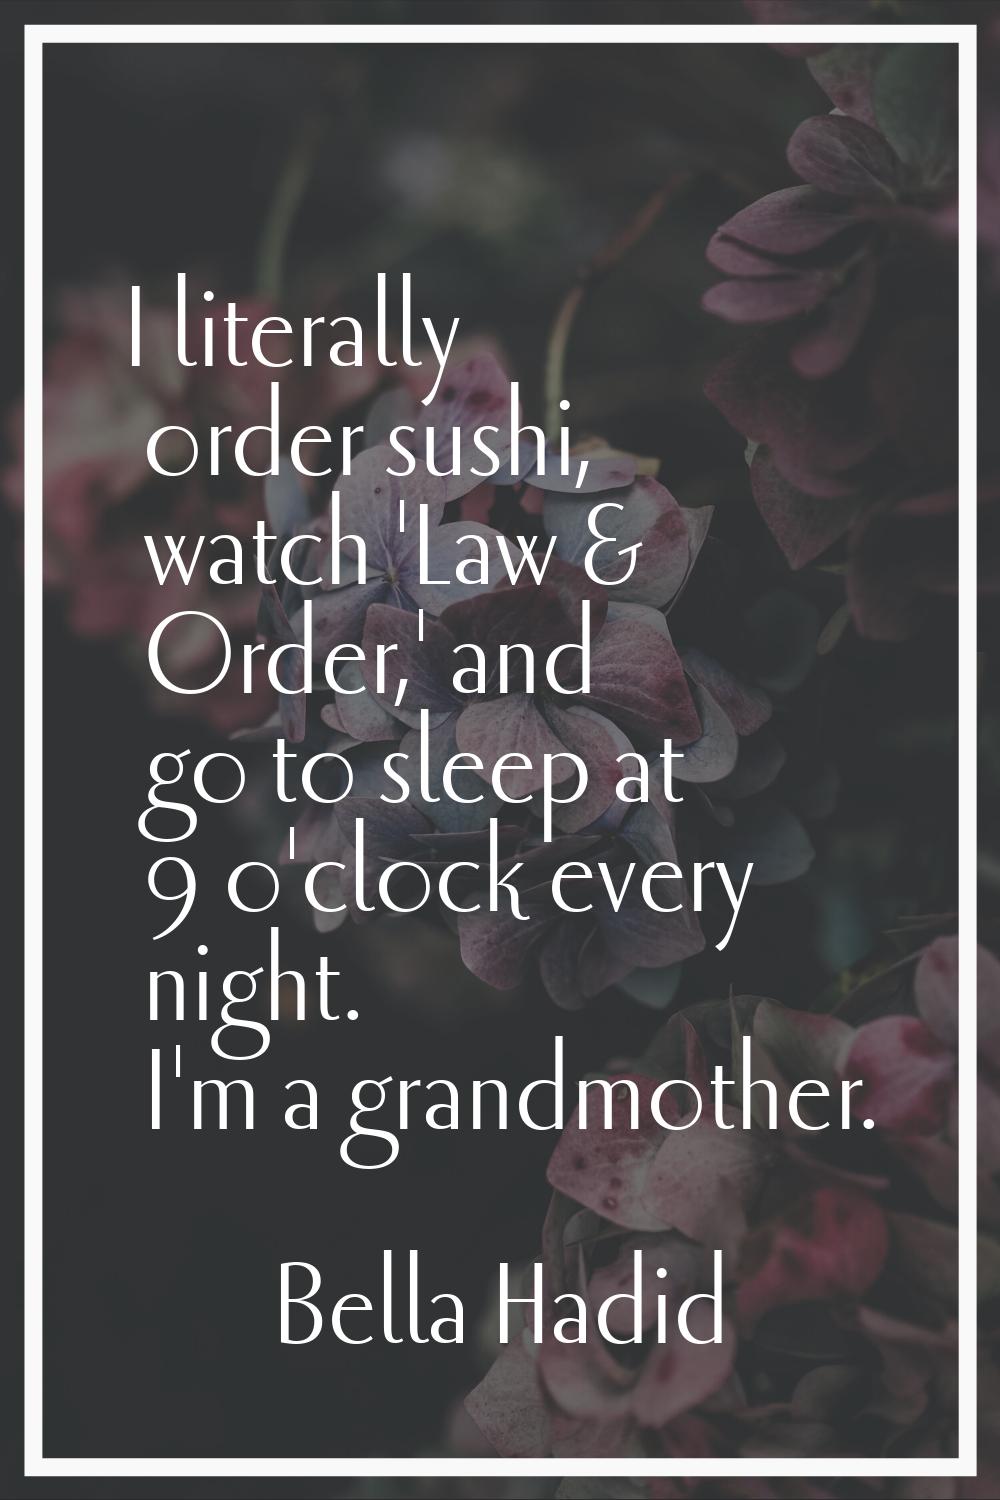 I literally order sushi, watch 'Law & Order,' and go to sleep at 9 o'clock every night. I'm a grand